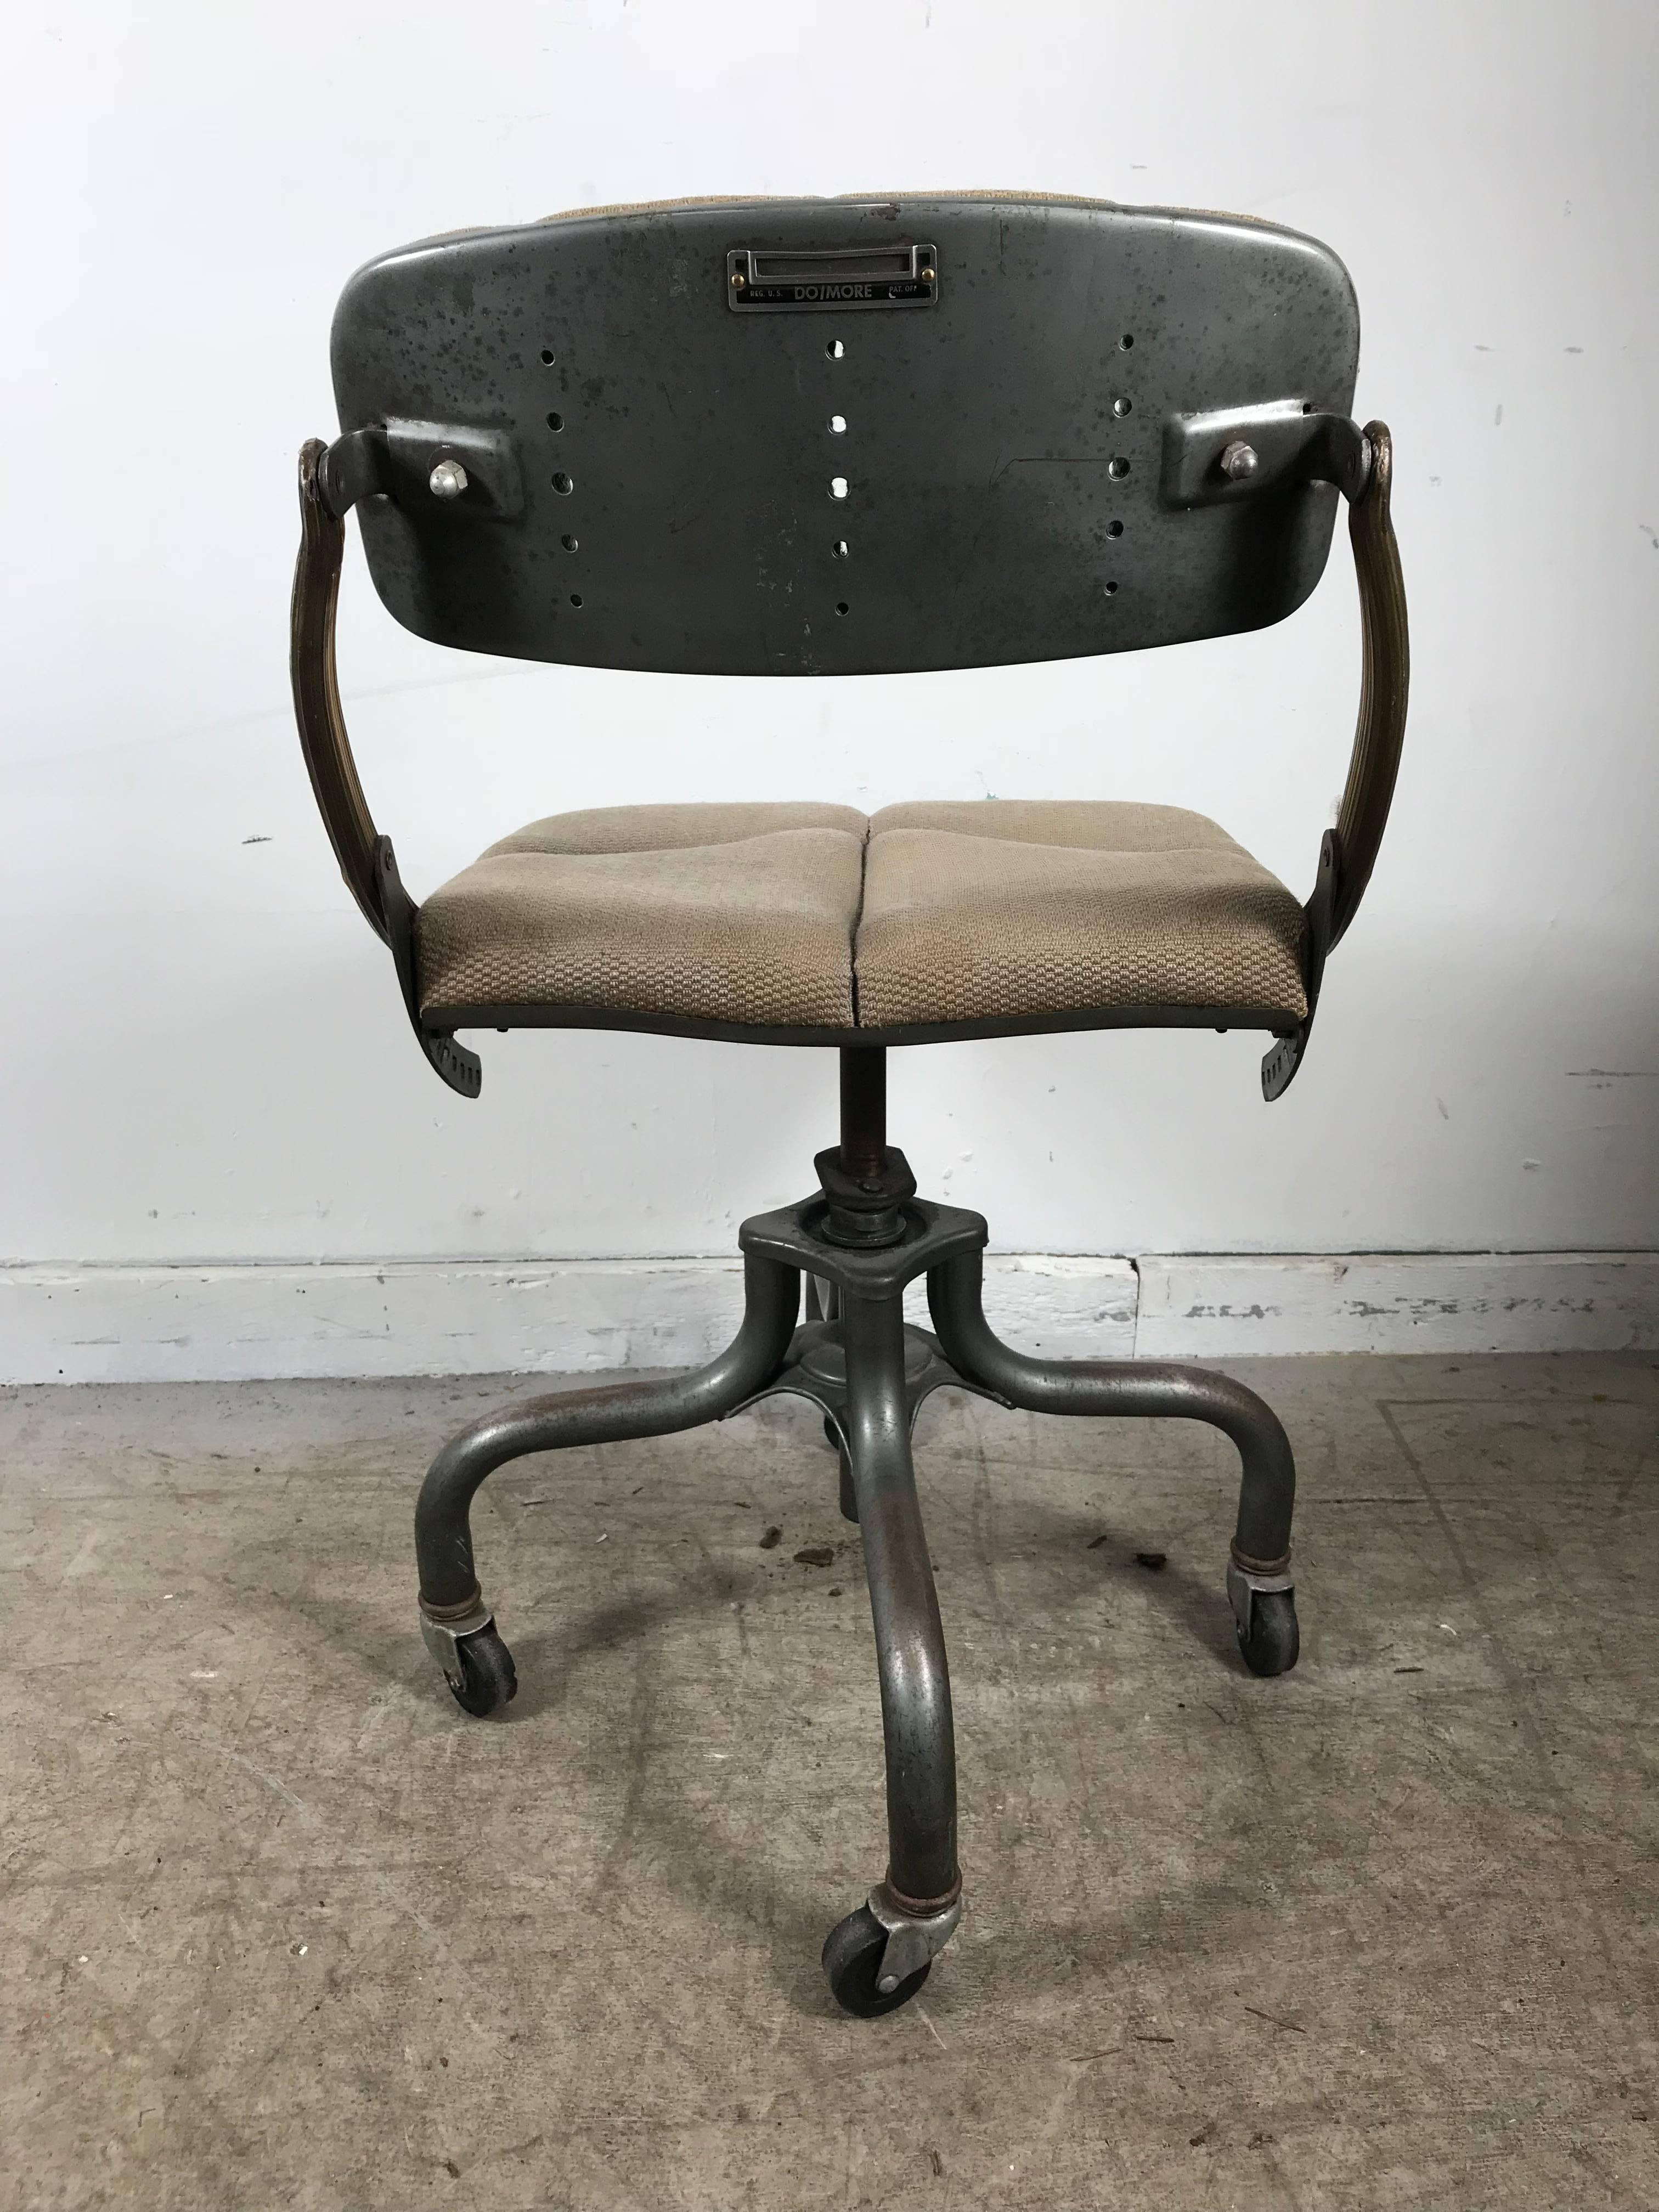 domore chair company